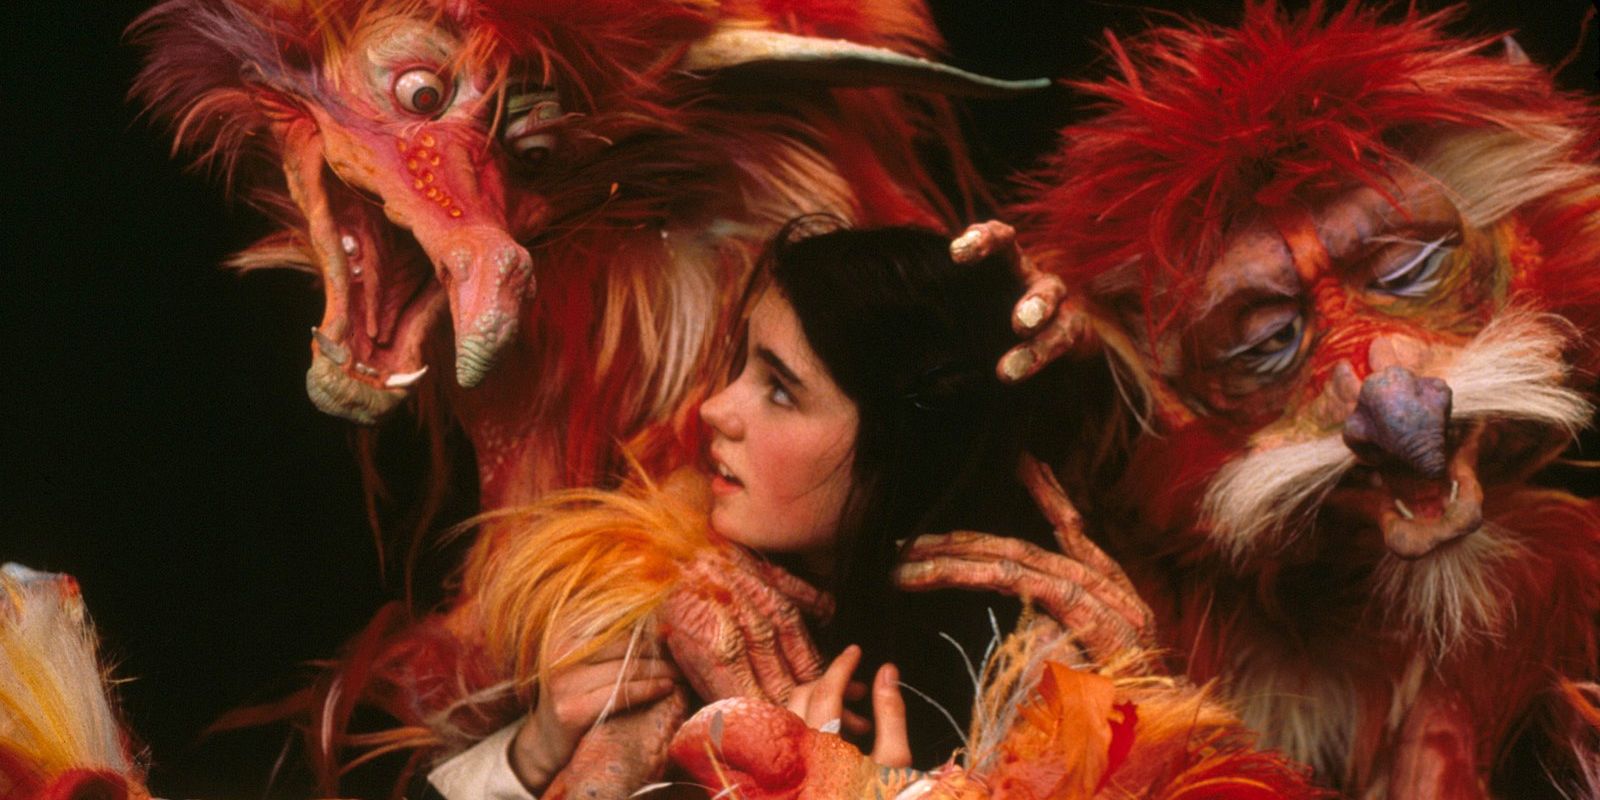 Sarah surrounded by goblins in Labyrinth.